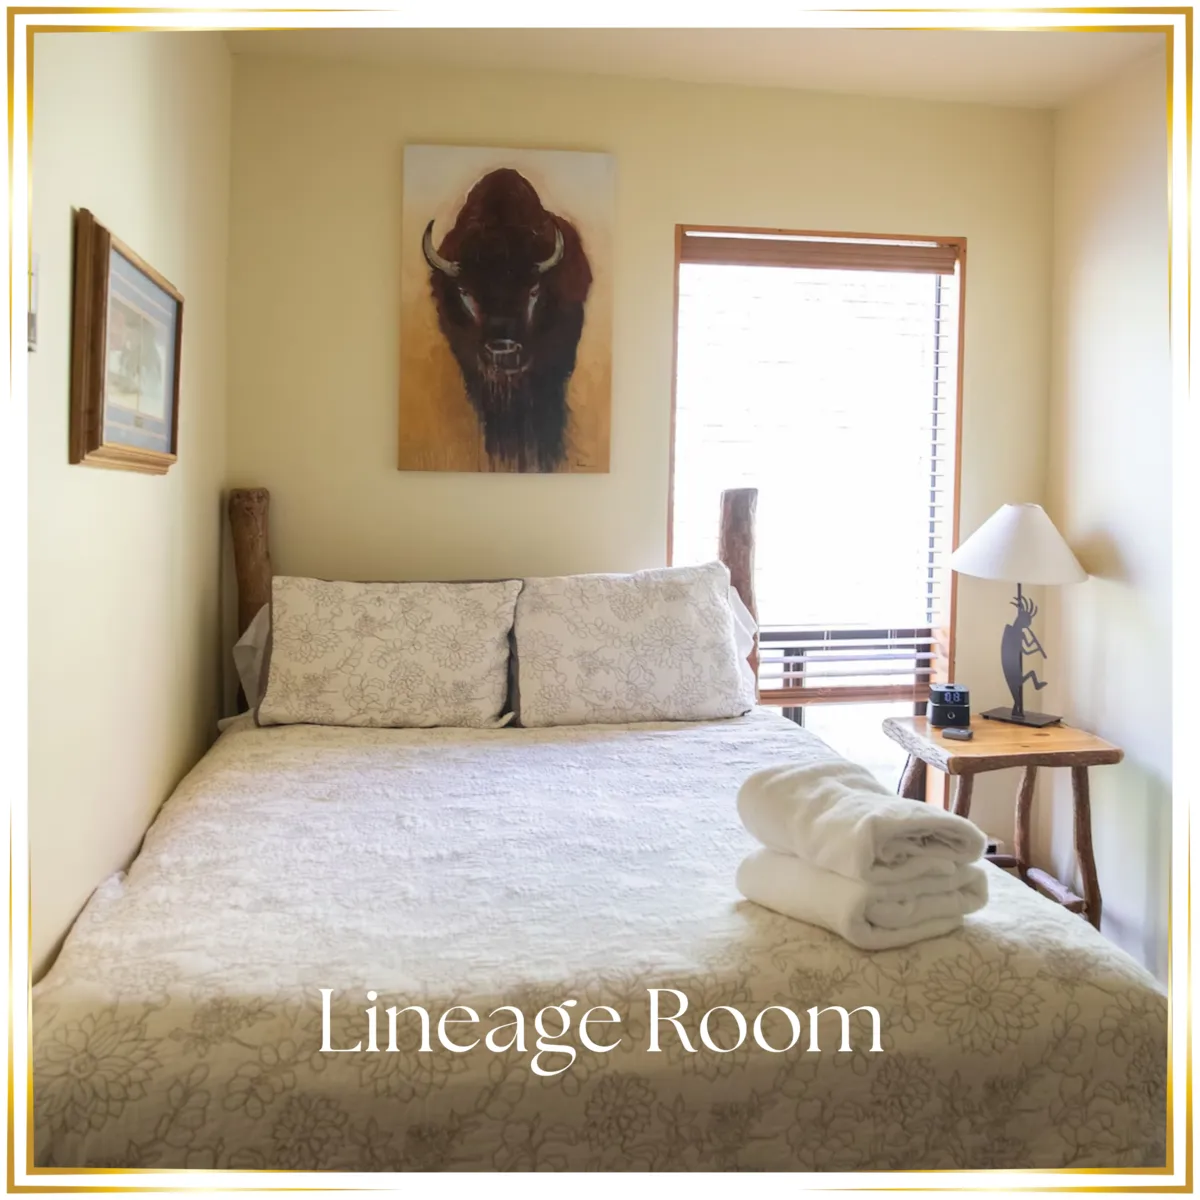 Lineage Room - Private Room